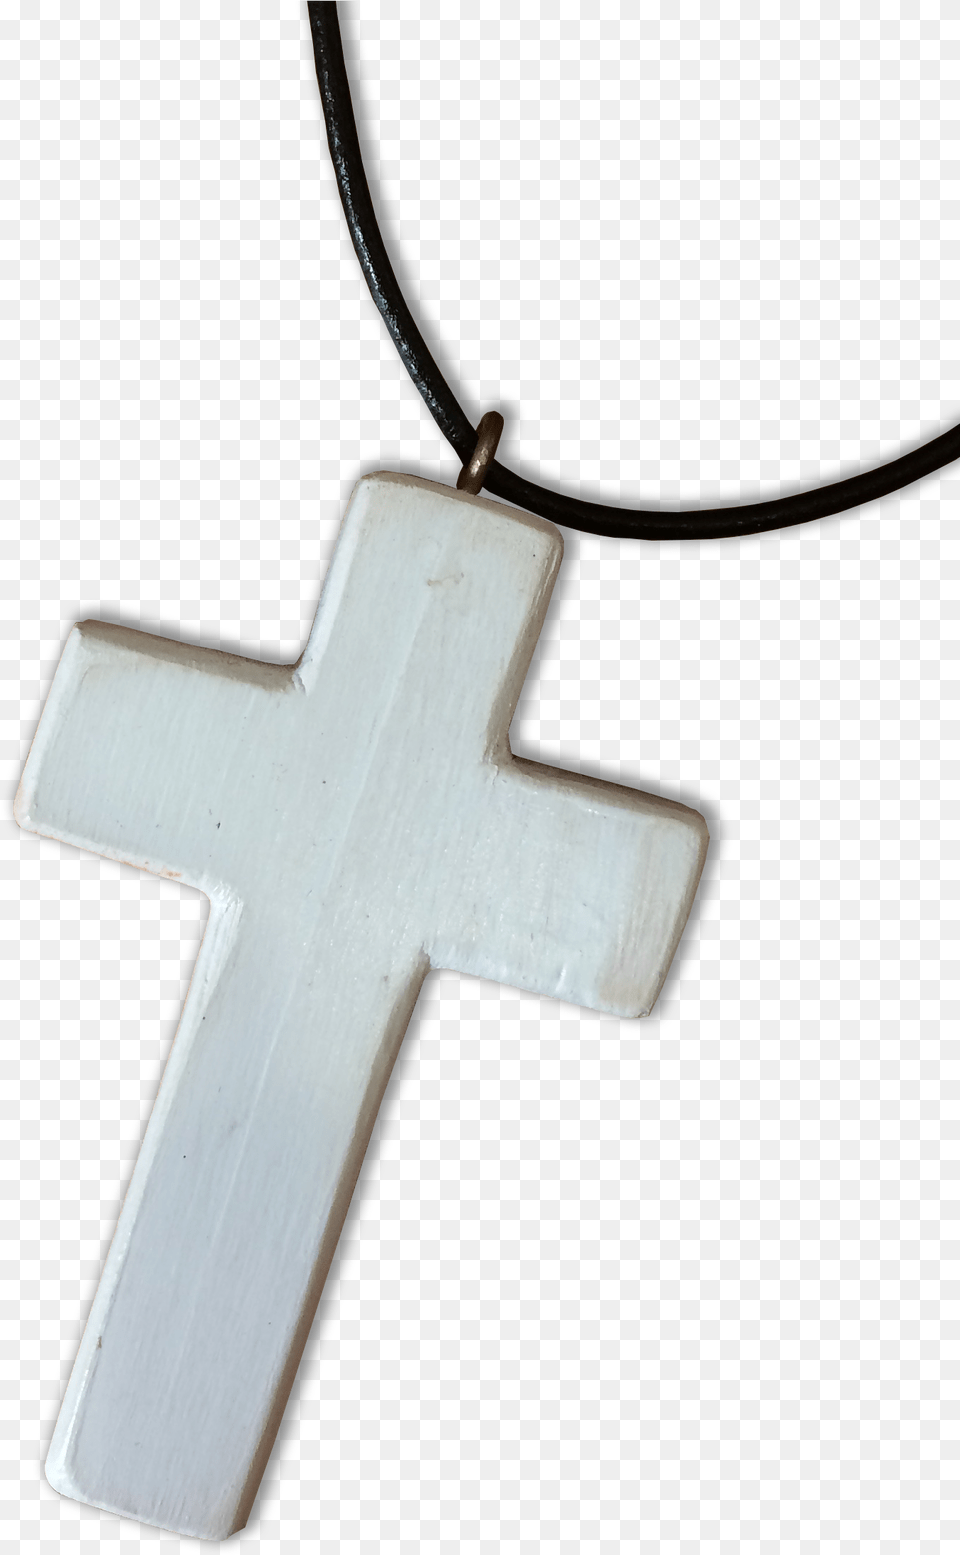 Wooden Cross Necklace Locket, Accessories, Pendant, Symbol, Jewelry Png Image